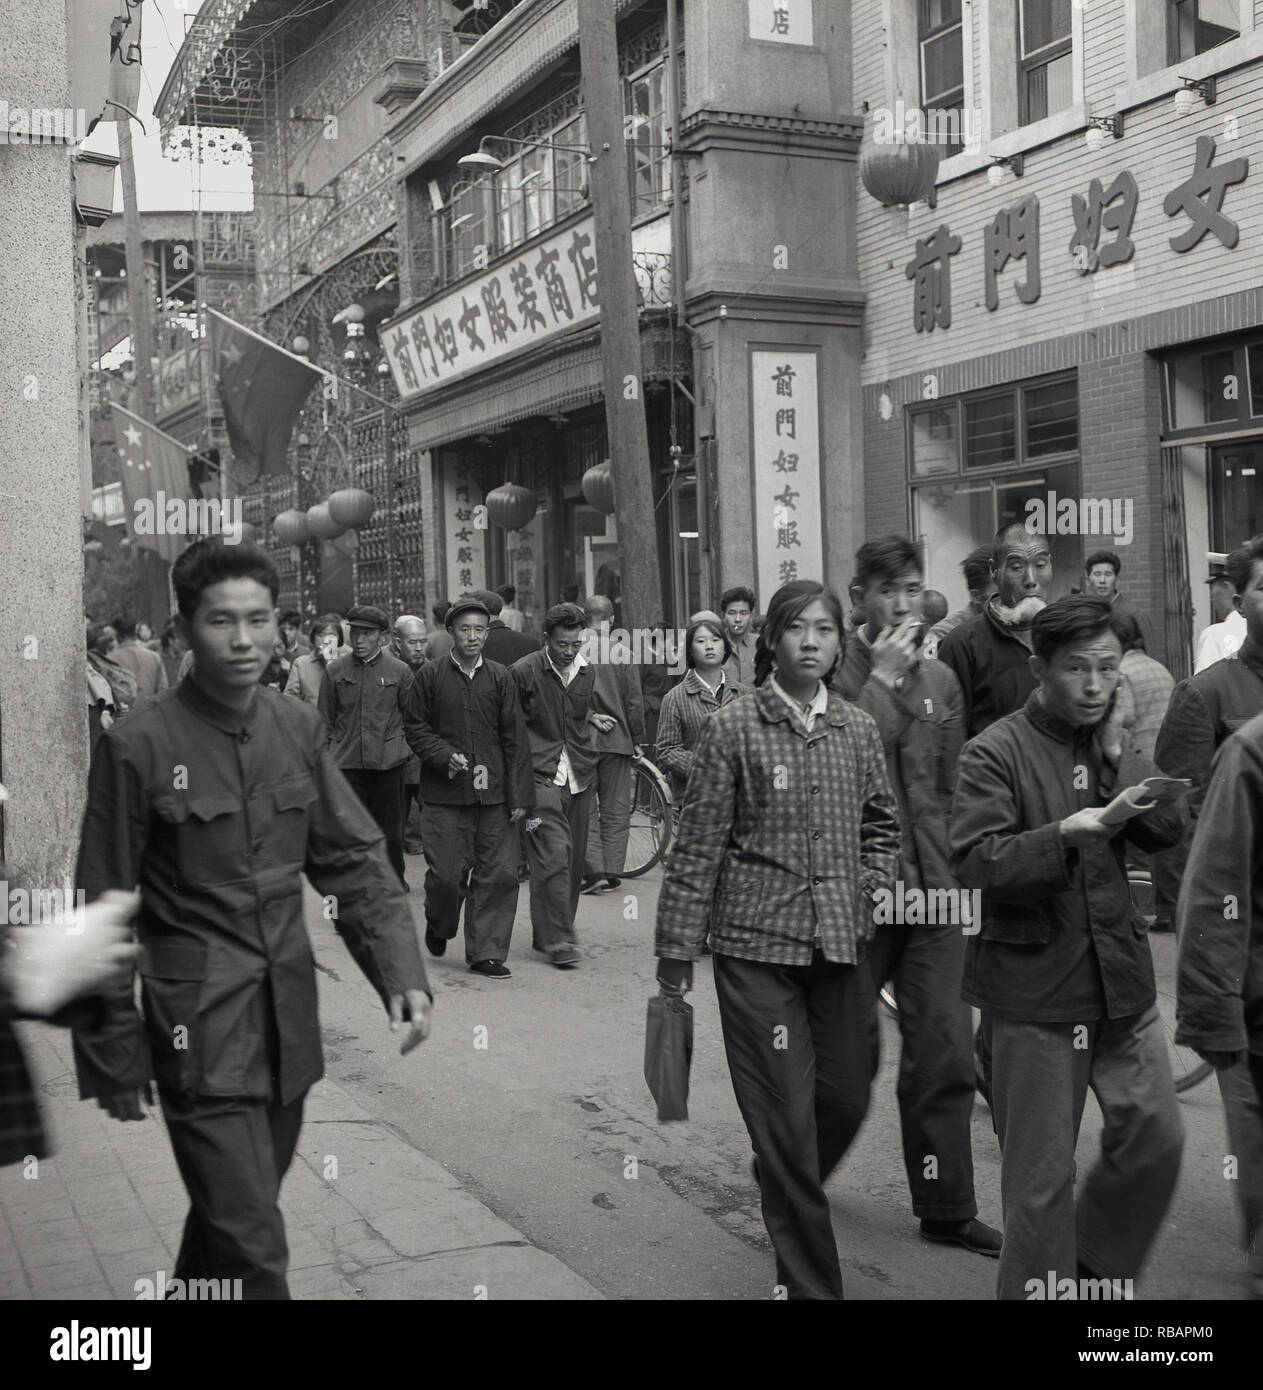 1950s, historical, Beijing, China, young chinese people, workers and/or students, walking through a city street. Stock Photo